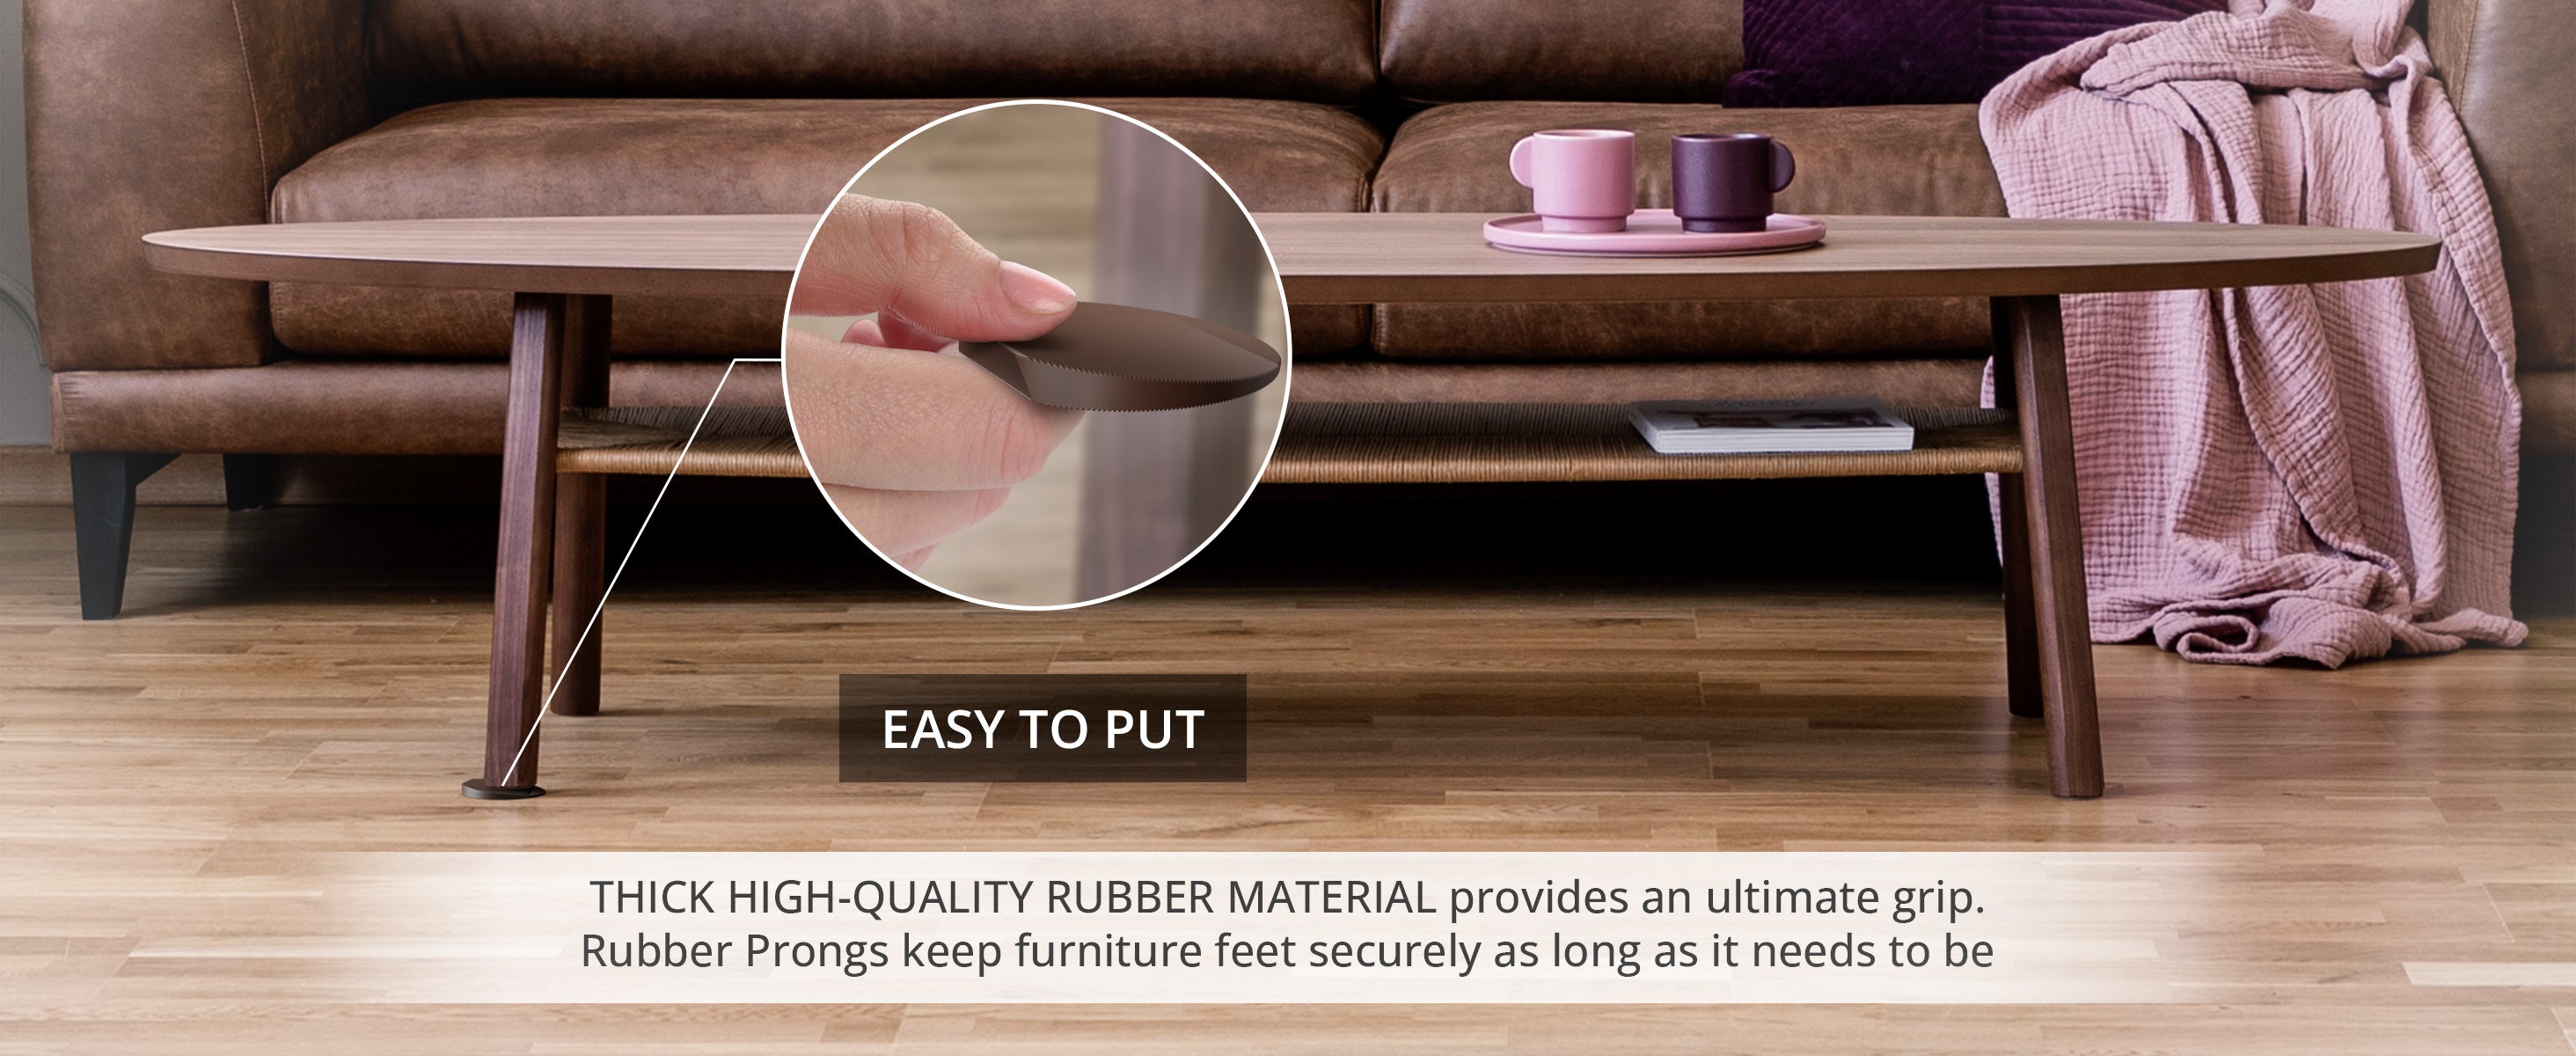 Multi-Purpose Furniture Leveling Feet to Prevent Furniture from Wobbling